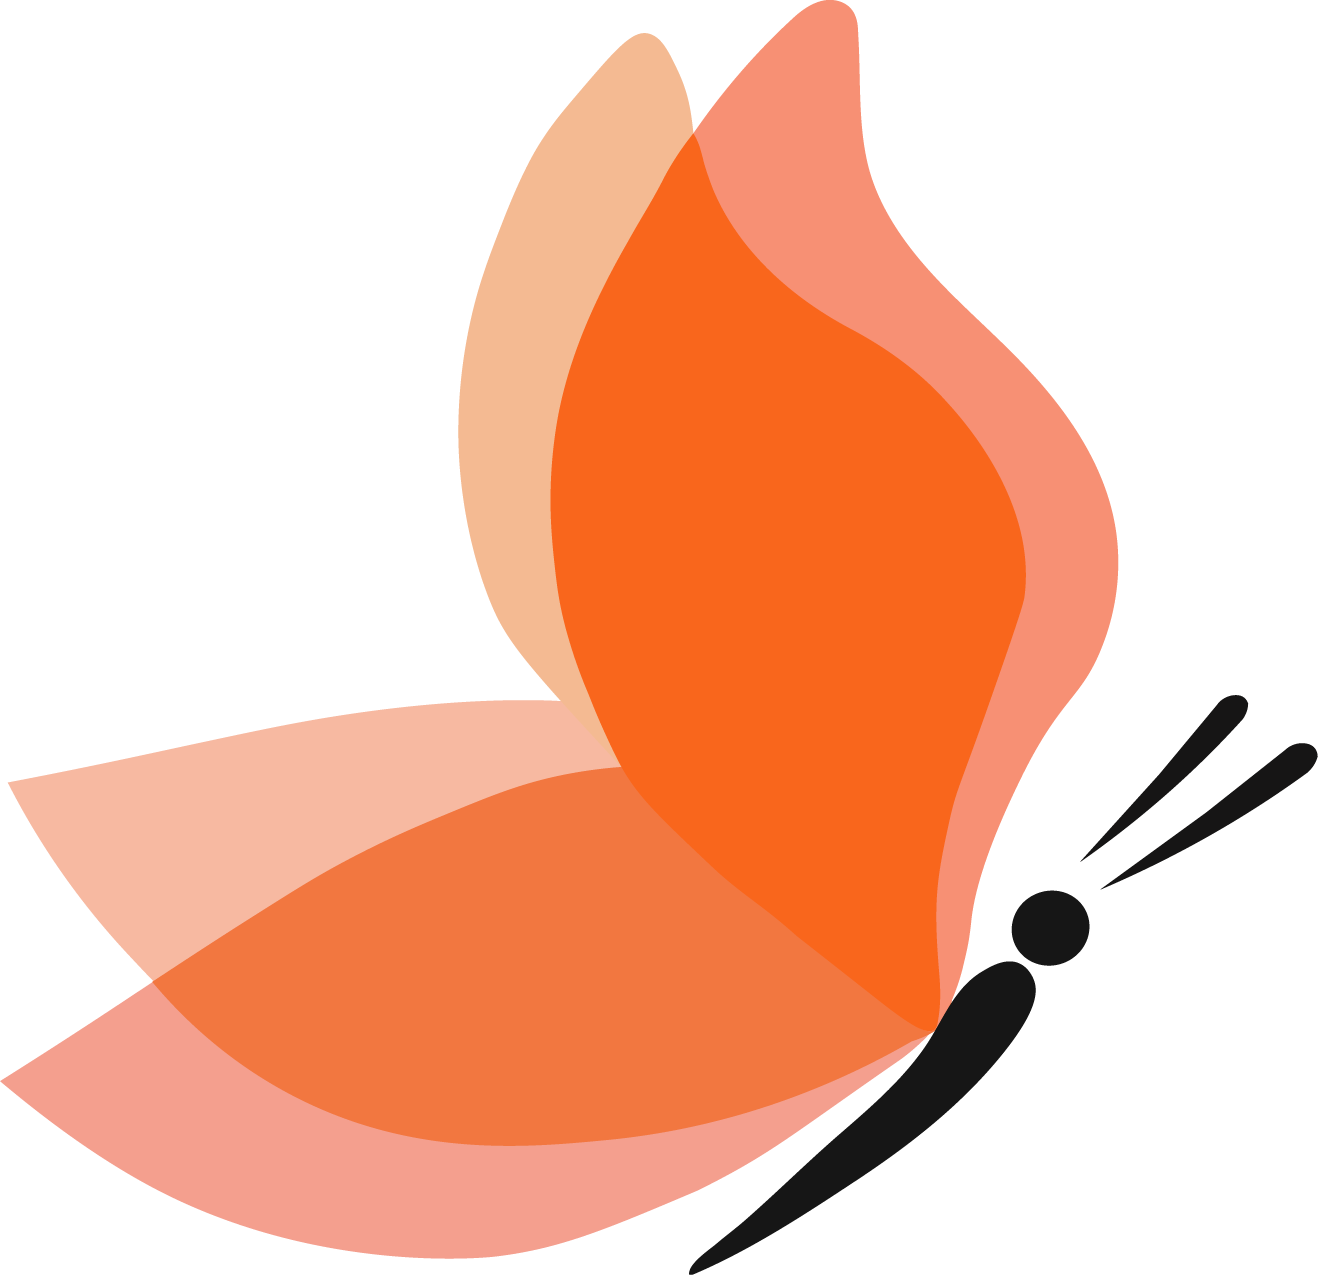 Langtrees_orange_butterfly_logo.png